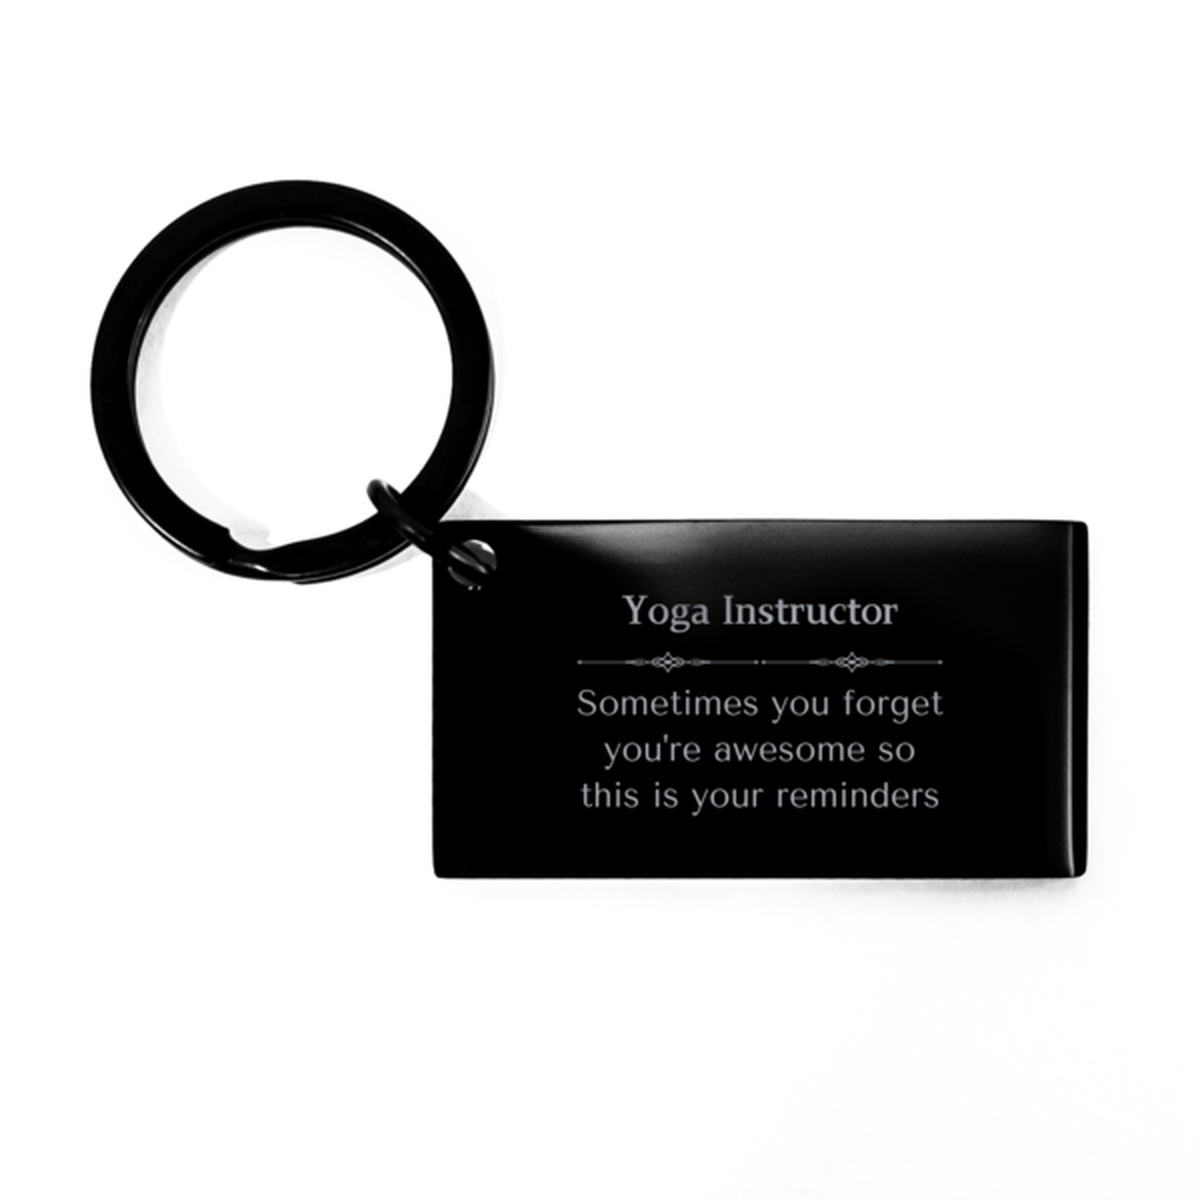 Sentimental Yoga Instructor Keychain, Author Sometimes you forget you're awesome so this is your reminders, Graduation Christmas Birthday Gifts for Yoga Instructor, Men, Women, Coworkers